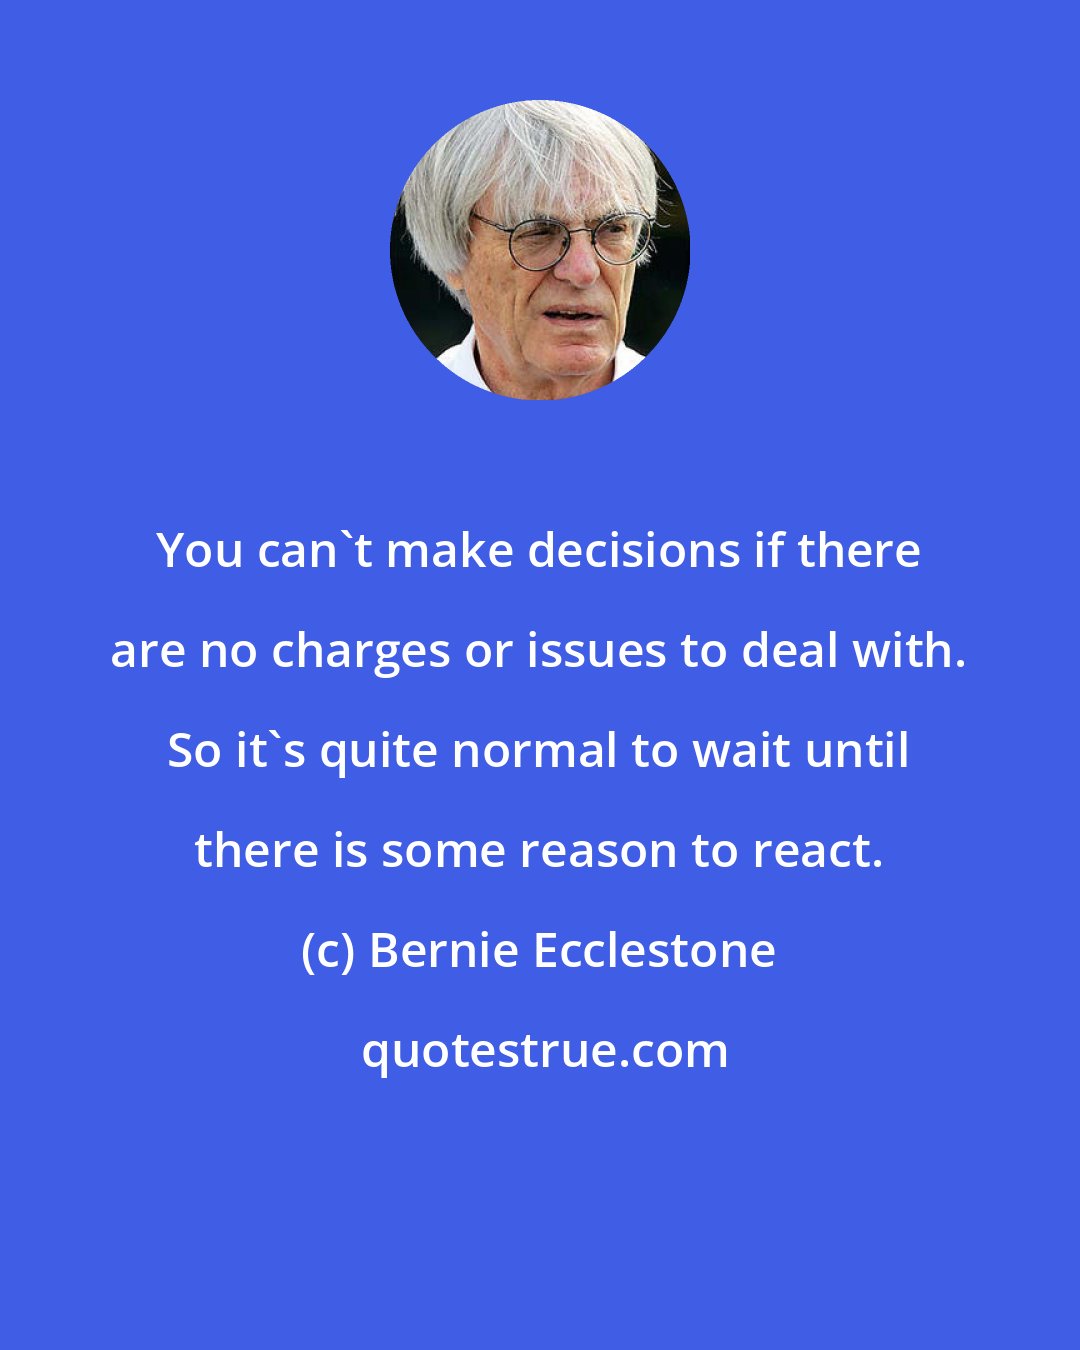 Bernie Ecclestone: You can't make decisions if there are no charges or issues to deal with. So it's quite normal to wait until there is some reason to react.